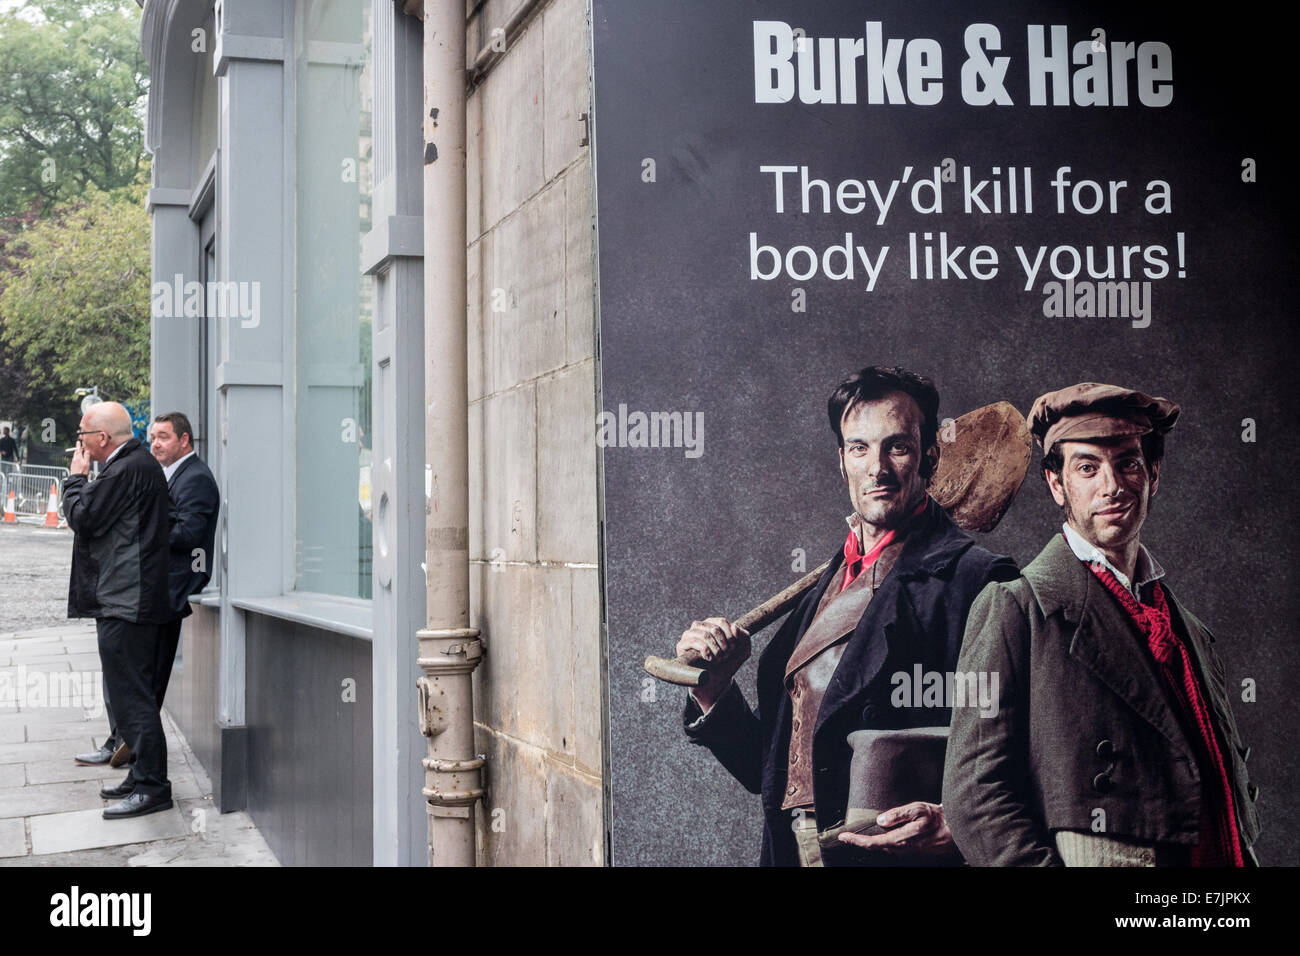 Man smoking in street near Burke and Hare billboard at the entrance to the London Dungeon, Edinburgh Stock Photo